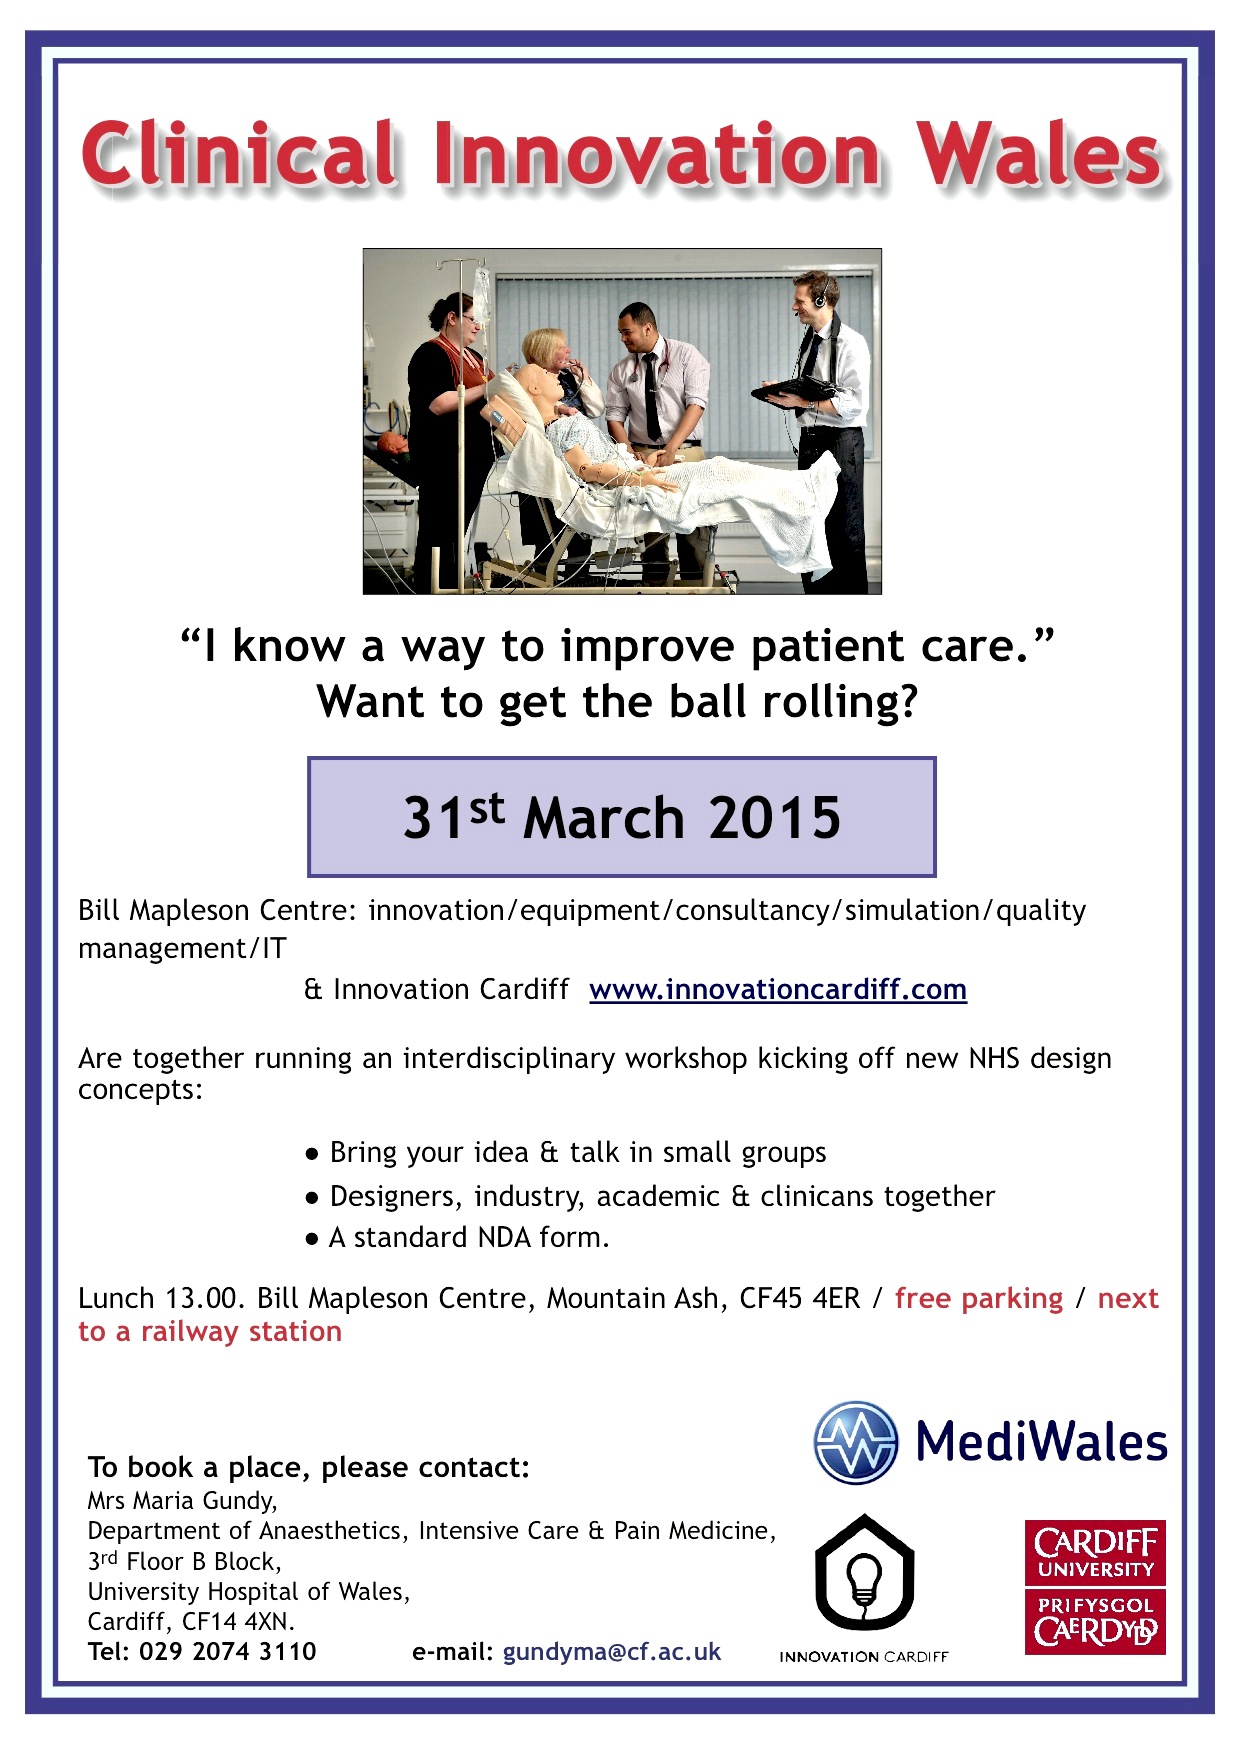 Clinical Innovation Wales